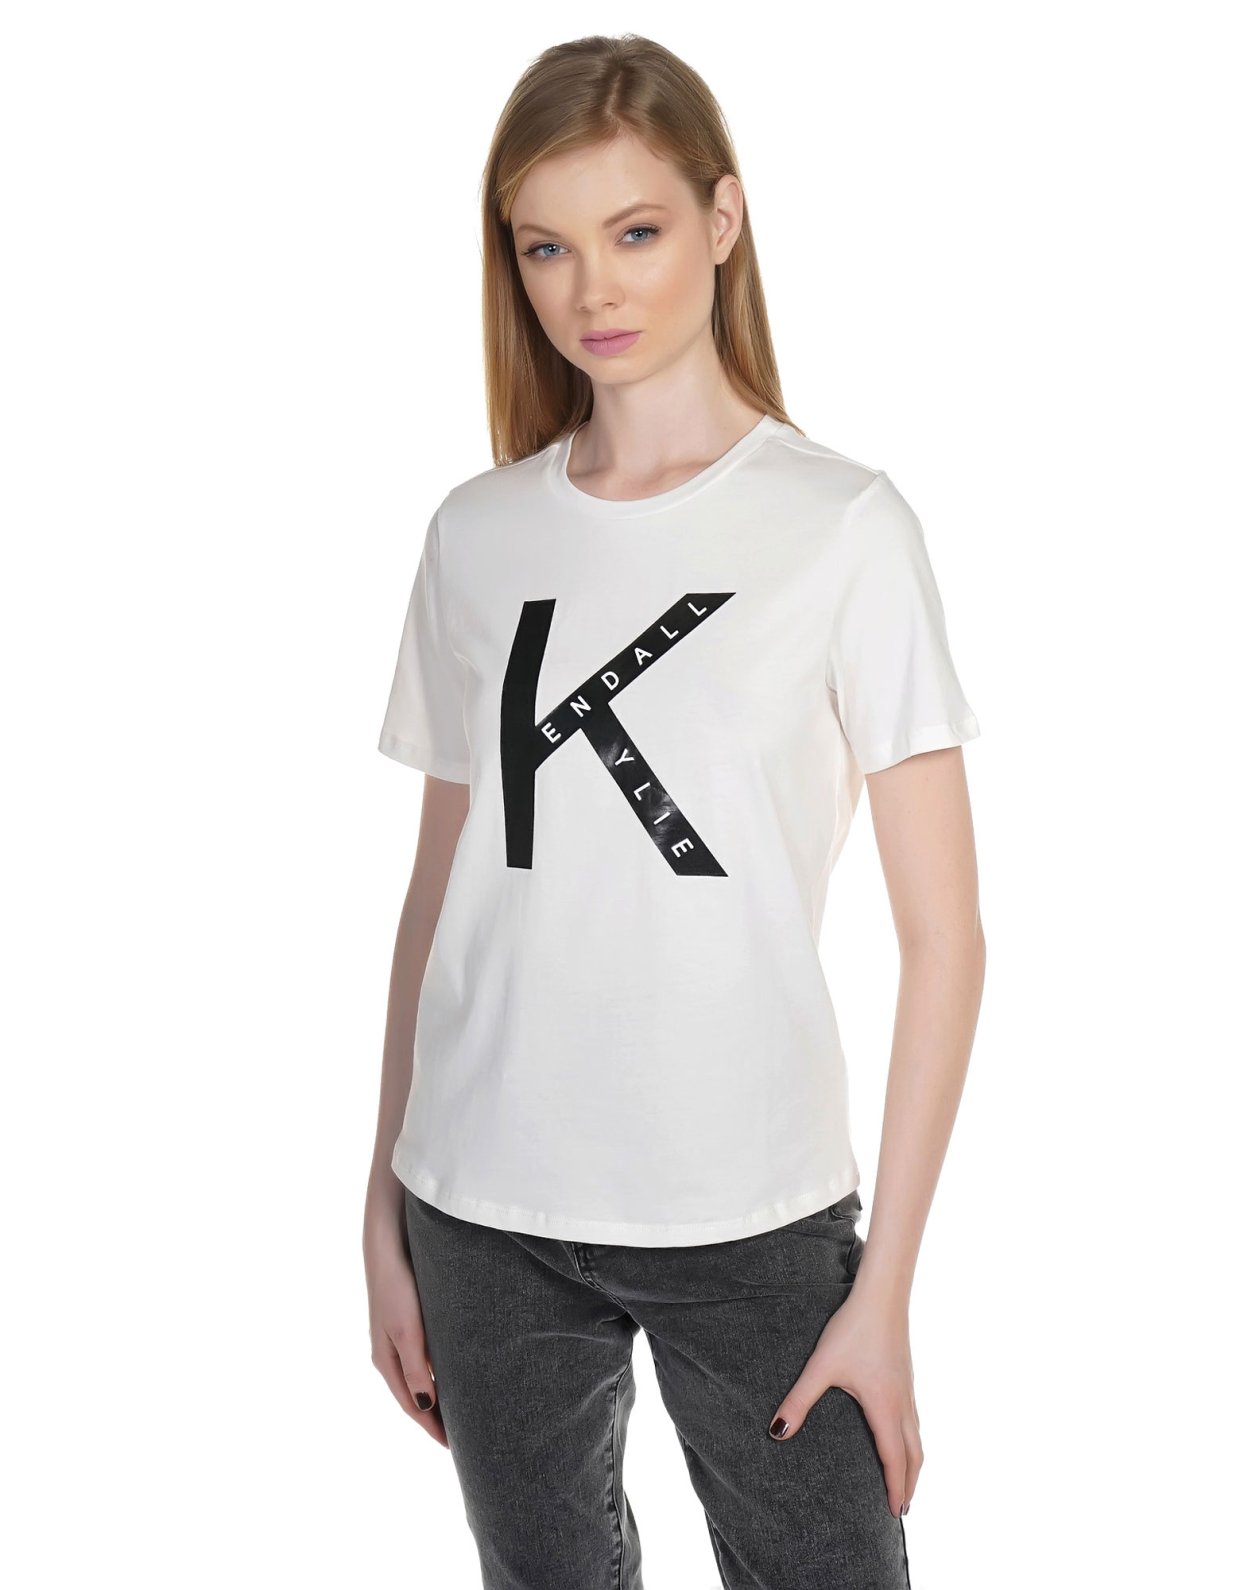 Kendall + Kylie Square logo t-shirt off white